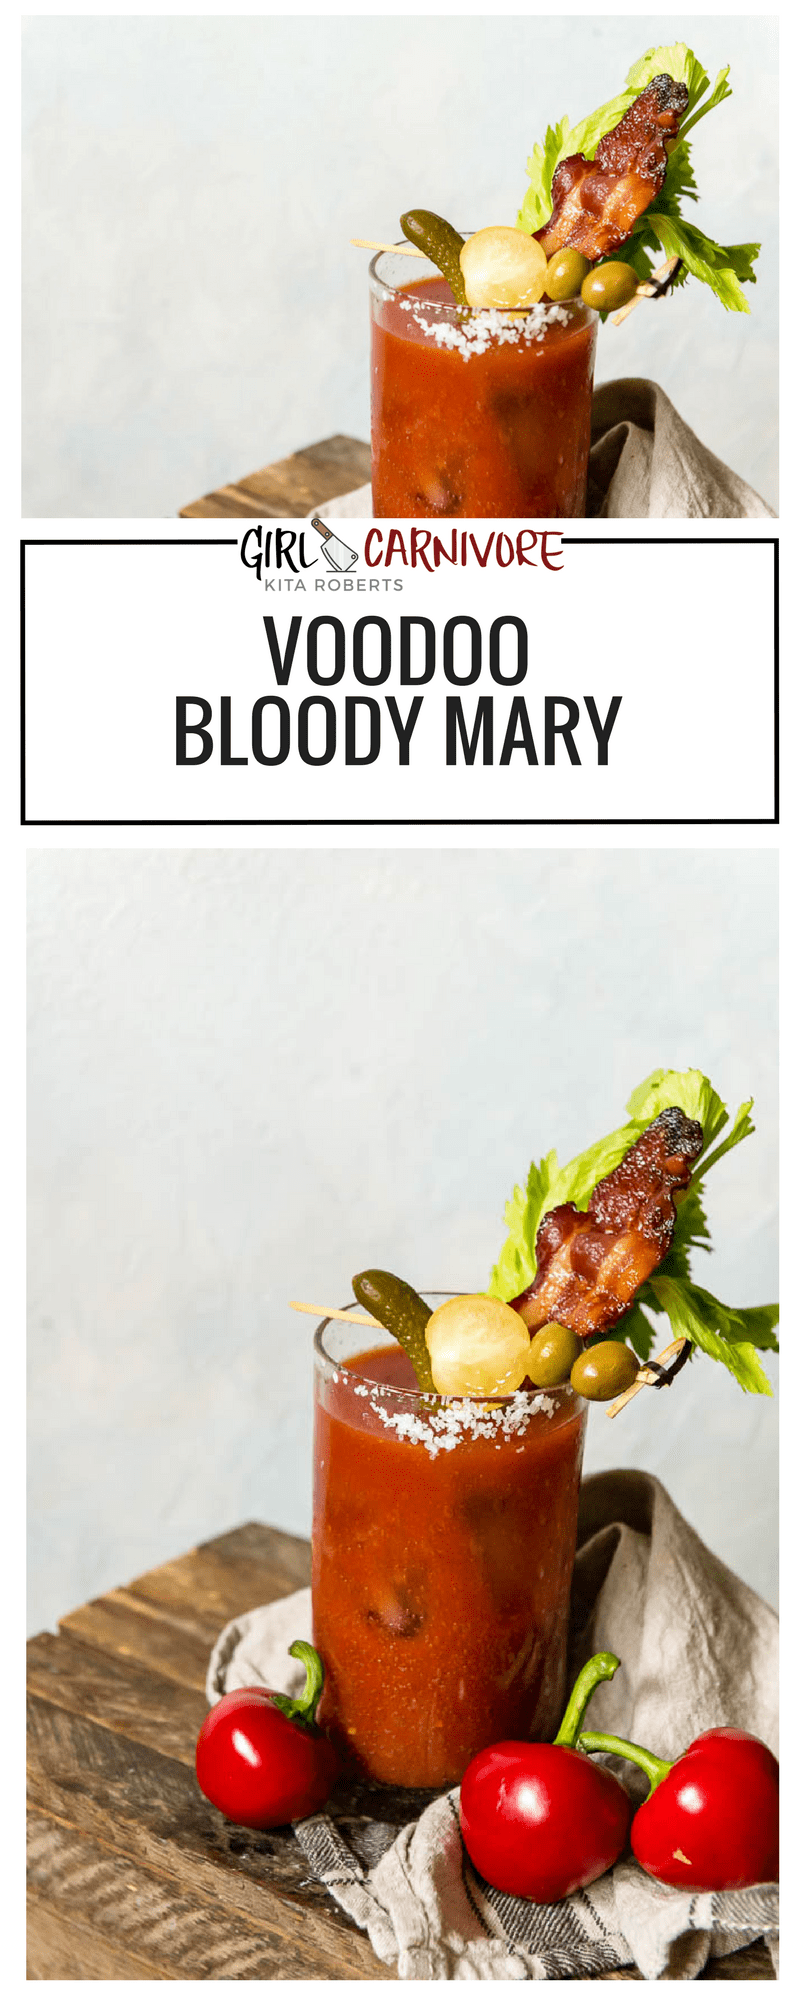 Voodoo Bloody Mary Cocktail Recipe | GirlCarnivore.com